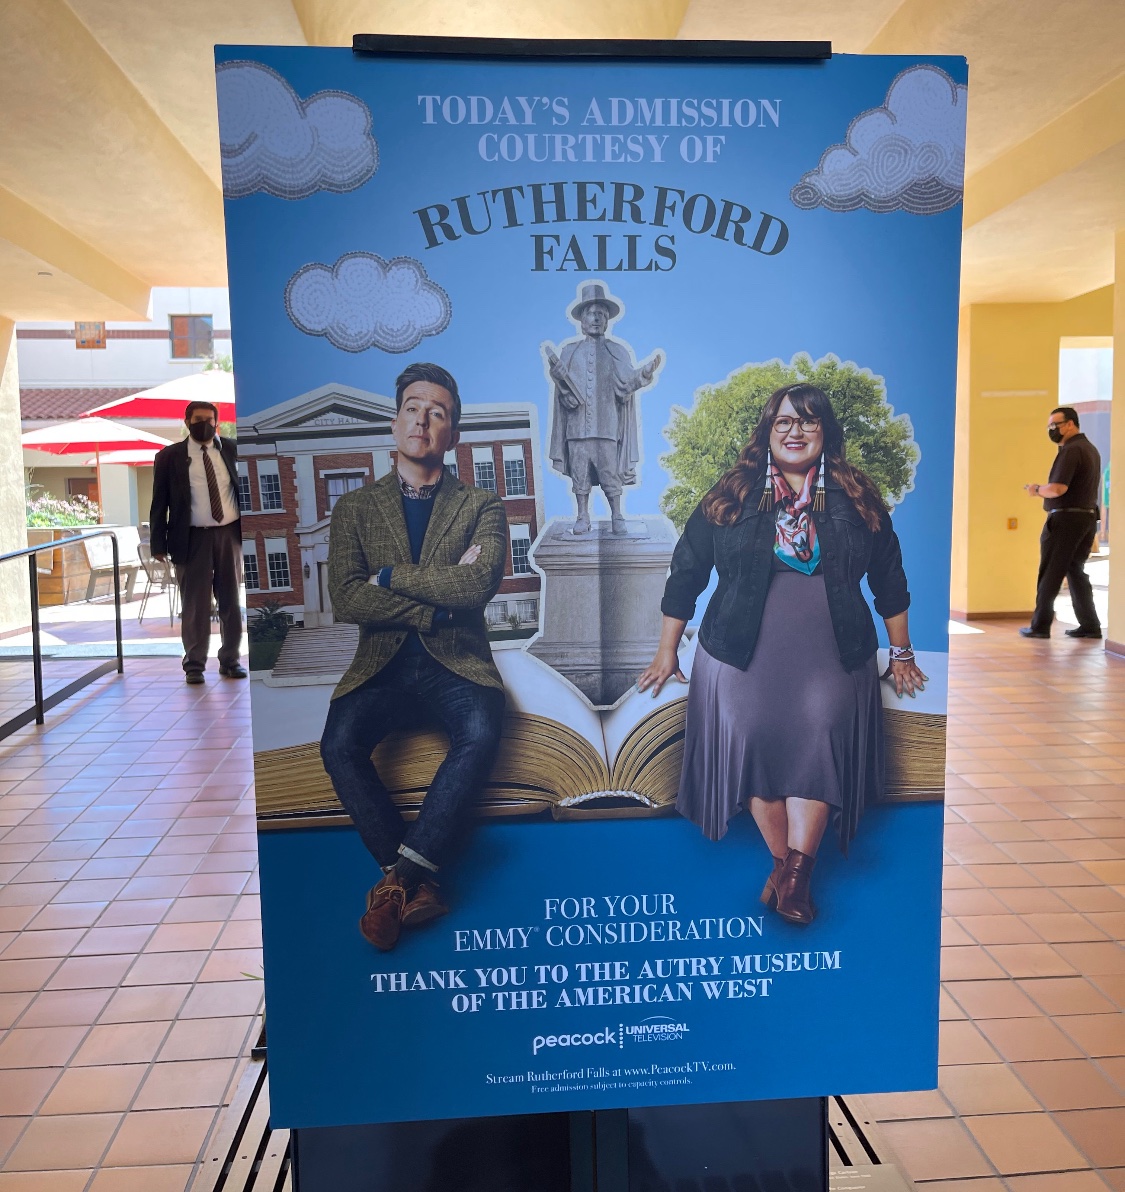 Today admissions free at the @TheAutry, compliments of #RutherfordFalls #FYC event! Hung with the lovely @edhelms @Jesseleighh1 @DustinWMilligan!  Multiple times Native folks of all ages came up to tell us how much they enjoyed the show and what it meant to them. ❤️😭🙏🏽🤞🏽🤞🏽